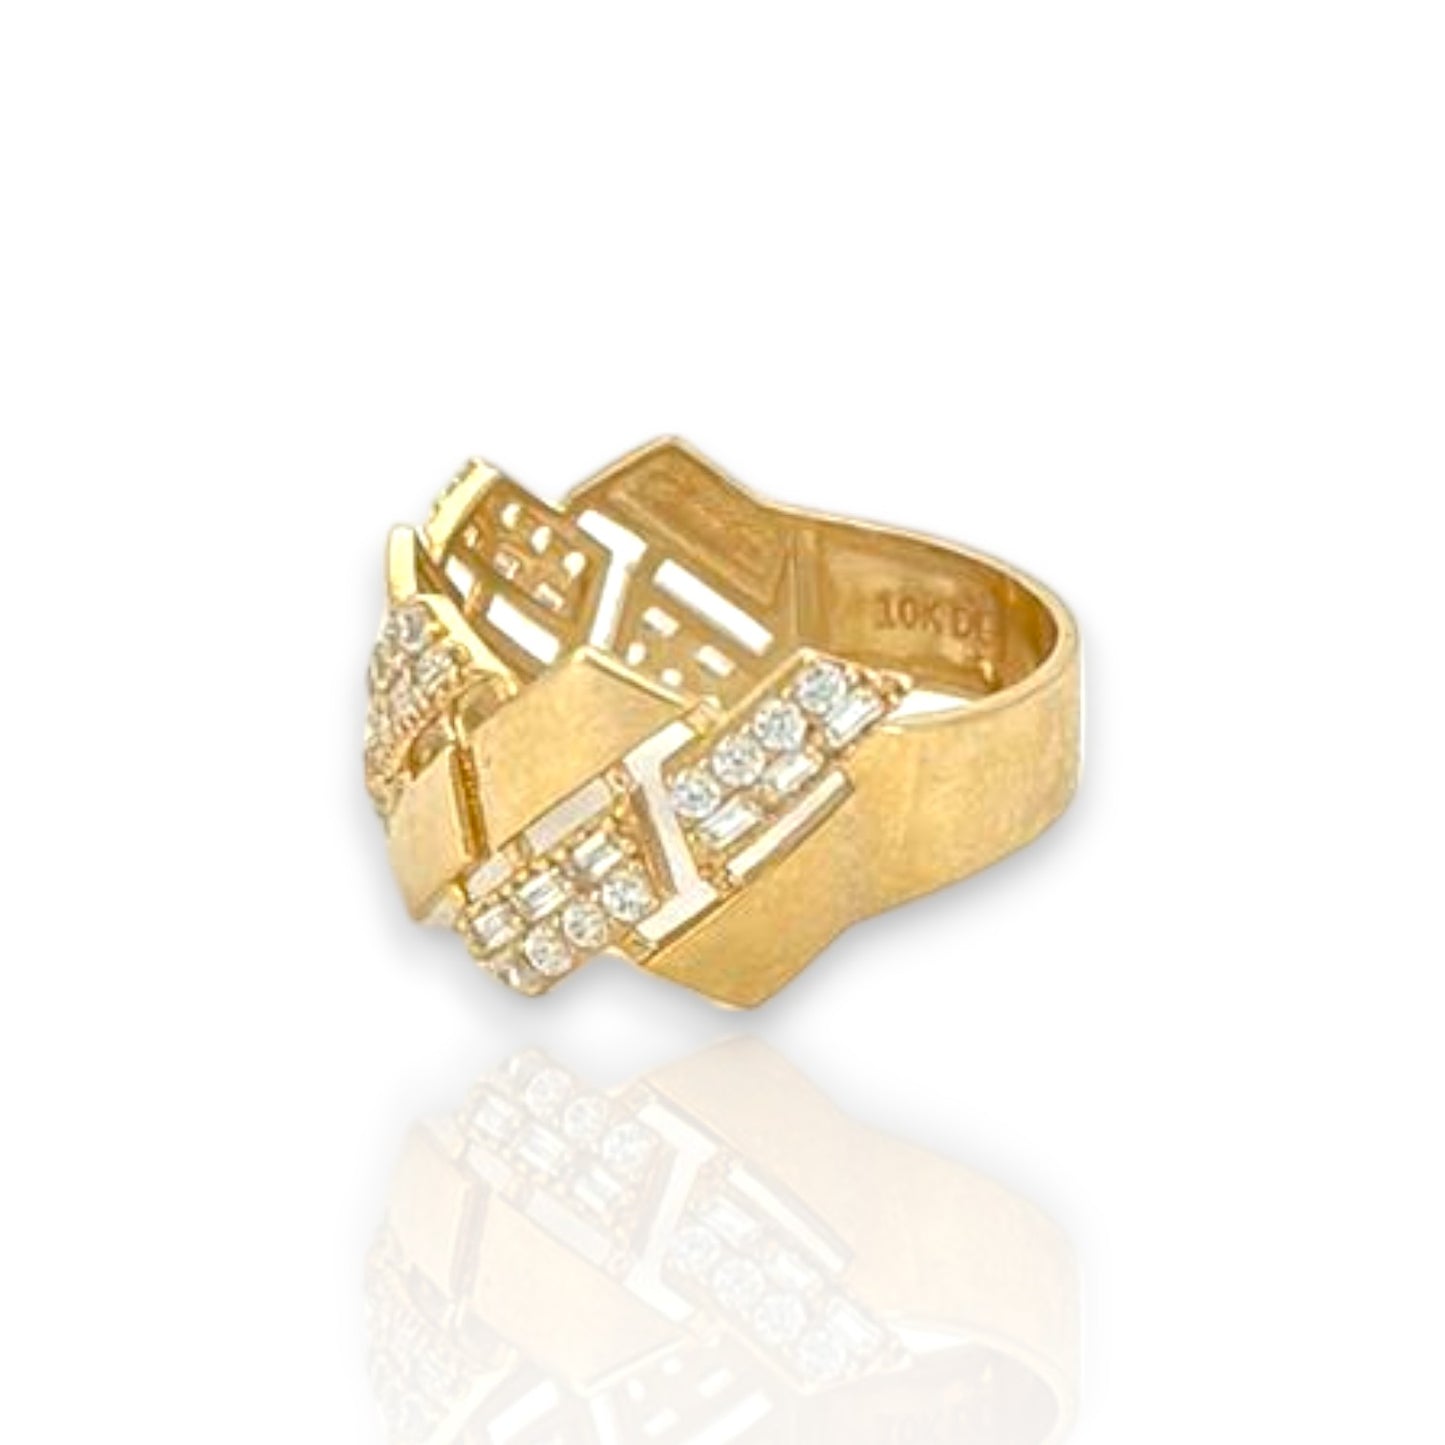 Miami Cuban Link Round and Baguette Cut Cz Ring - 10k Yellow Gold